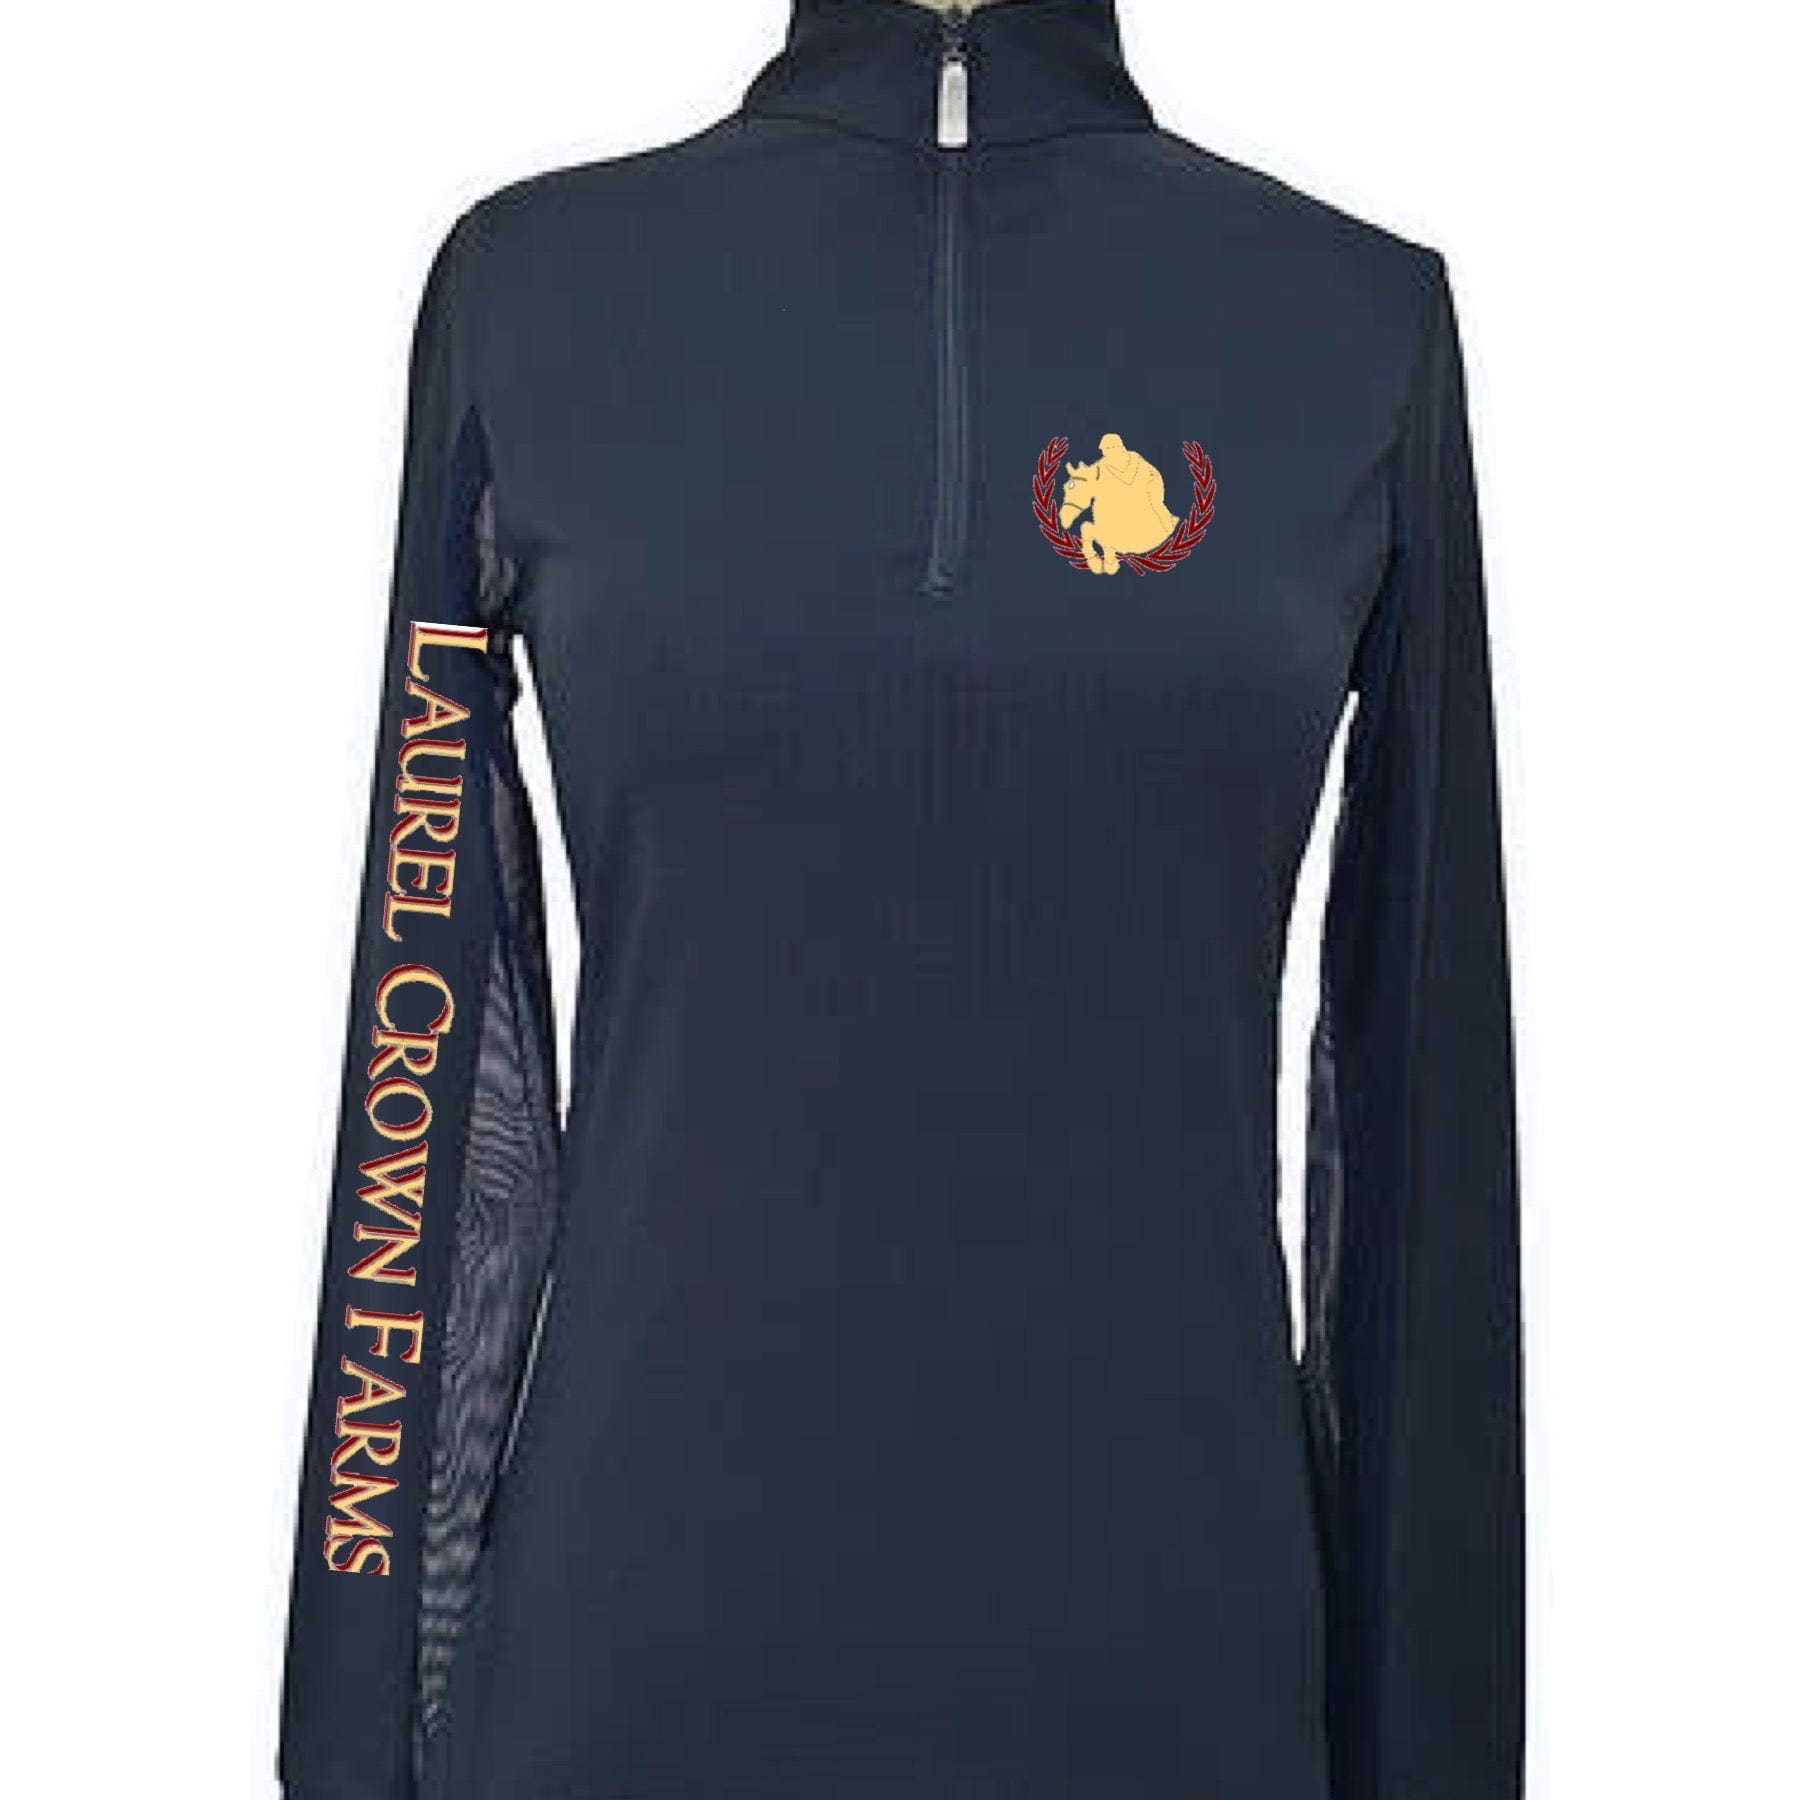 Equestrian Team Apparel Laurel Crown Farms Sun Shirt equestrian team apparel online tack store mobile tack store custom farm apparel custom show stable clothing equestrian lifestyle horse show clothing riding clothes horses equestrian tack store